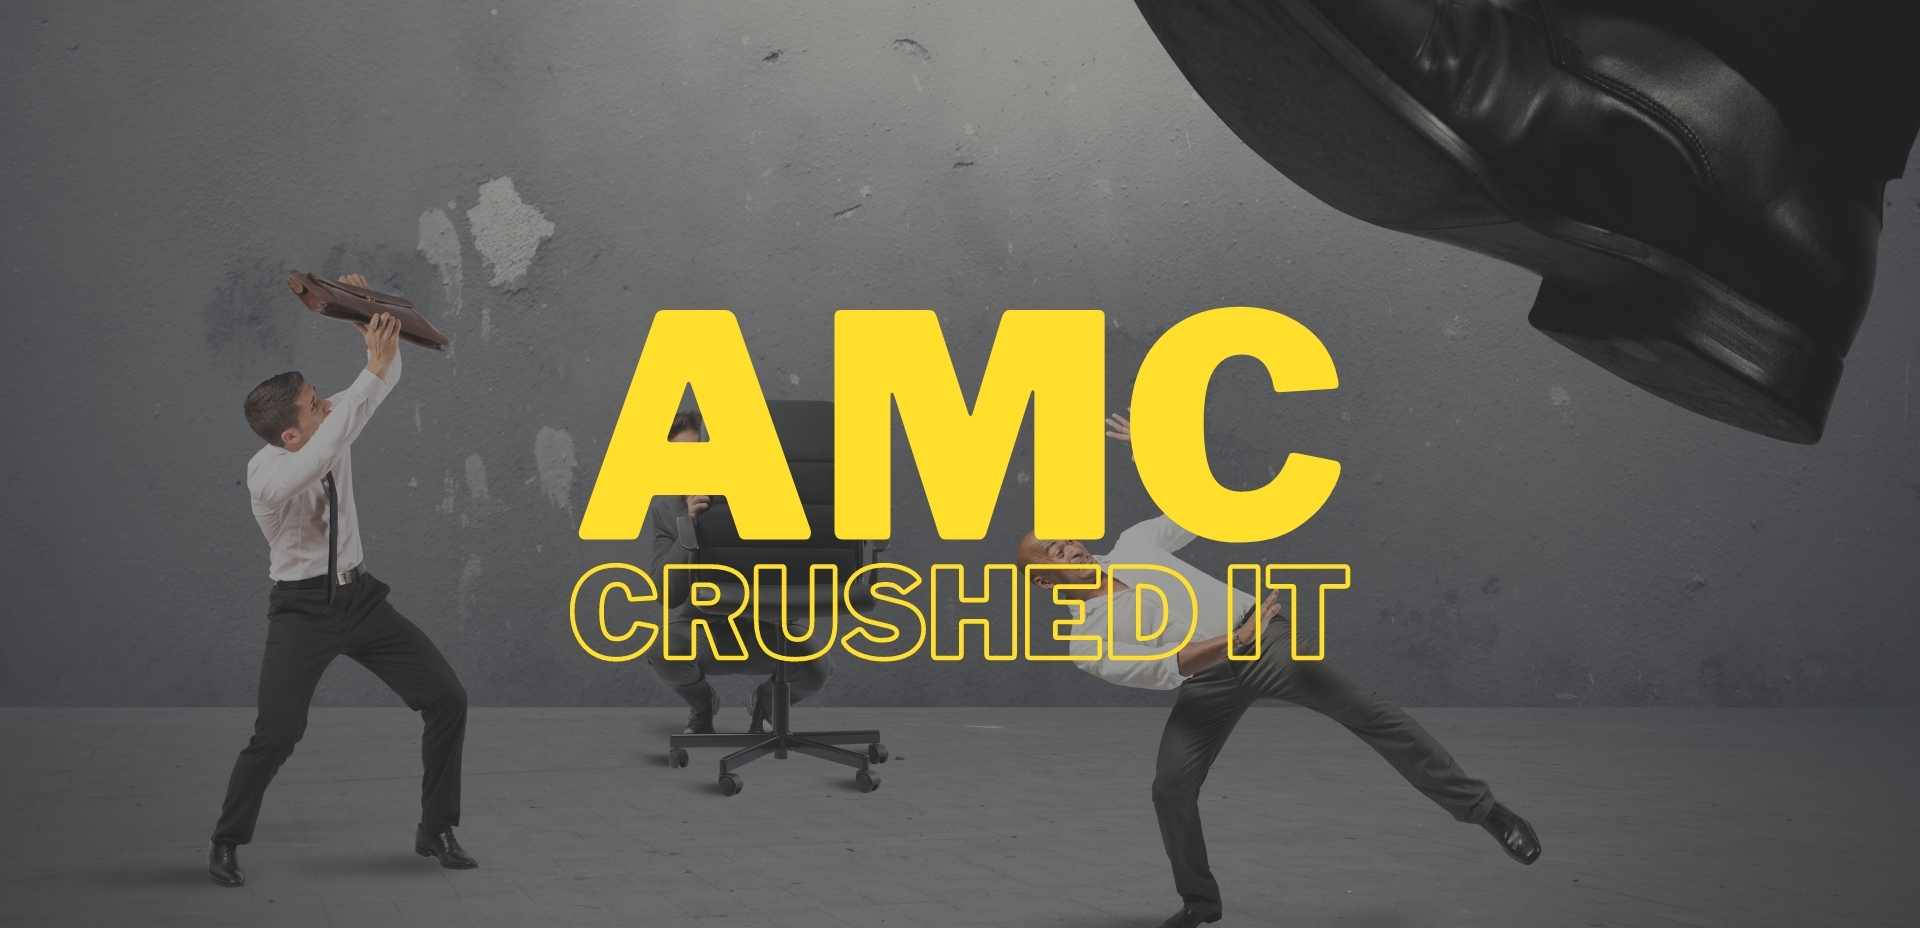 AMC Q2 2021 Earnings Report: Smashes revenue expectations.